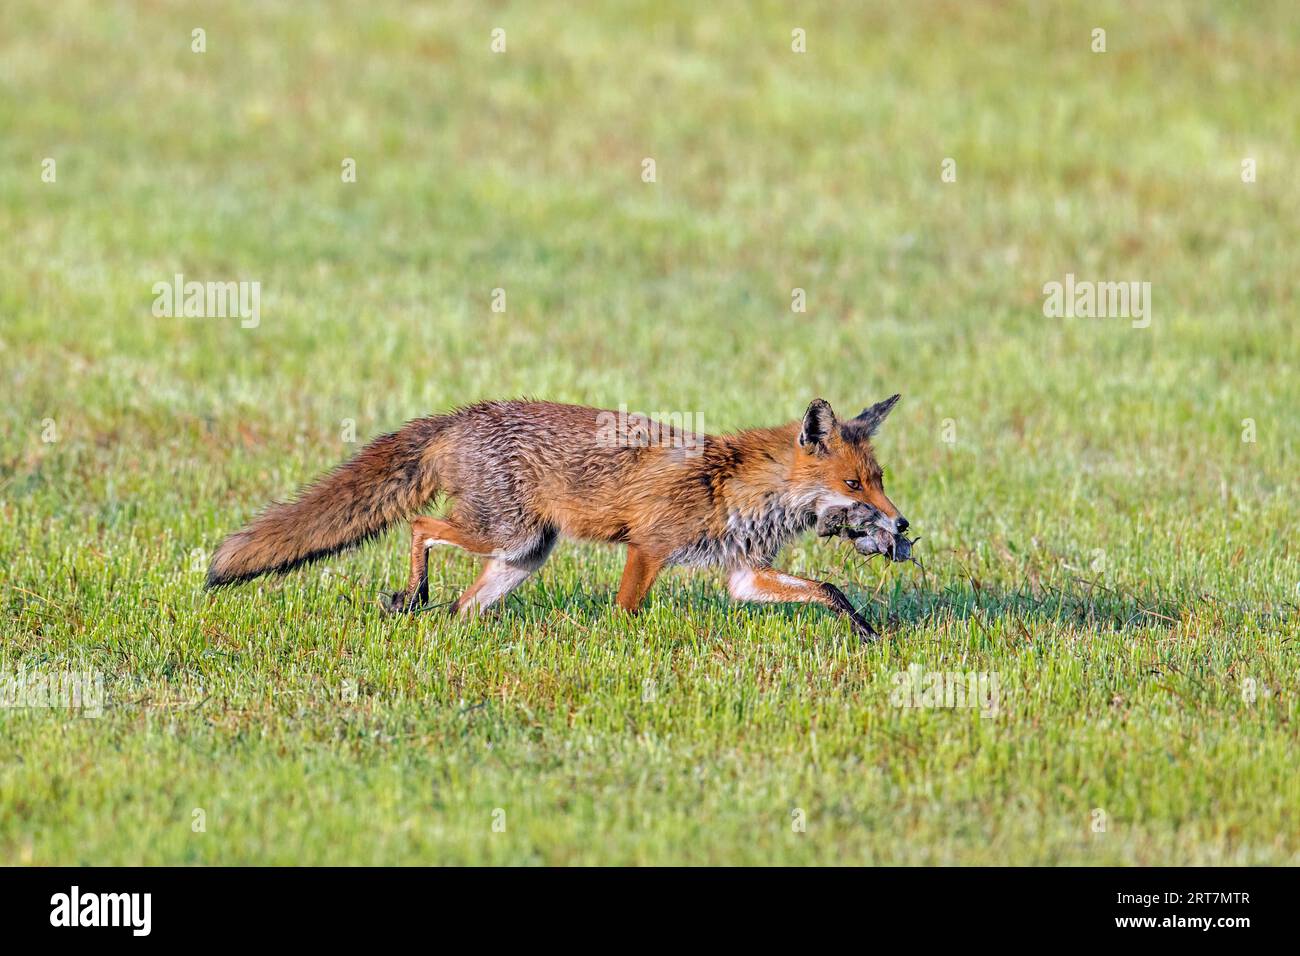 Red fox (Vulpes vulpes) hunting with mouthful of mice prey / voles in freshly mowed meadow / cut grassland to feed its kits / cubs in summer Stock Photo